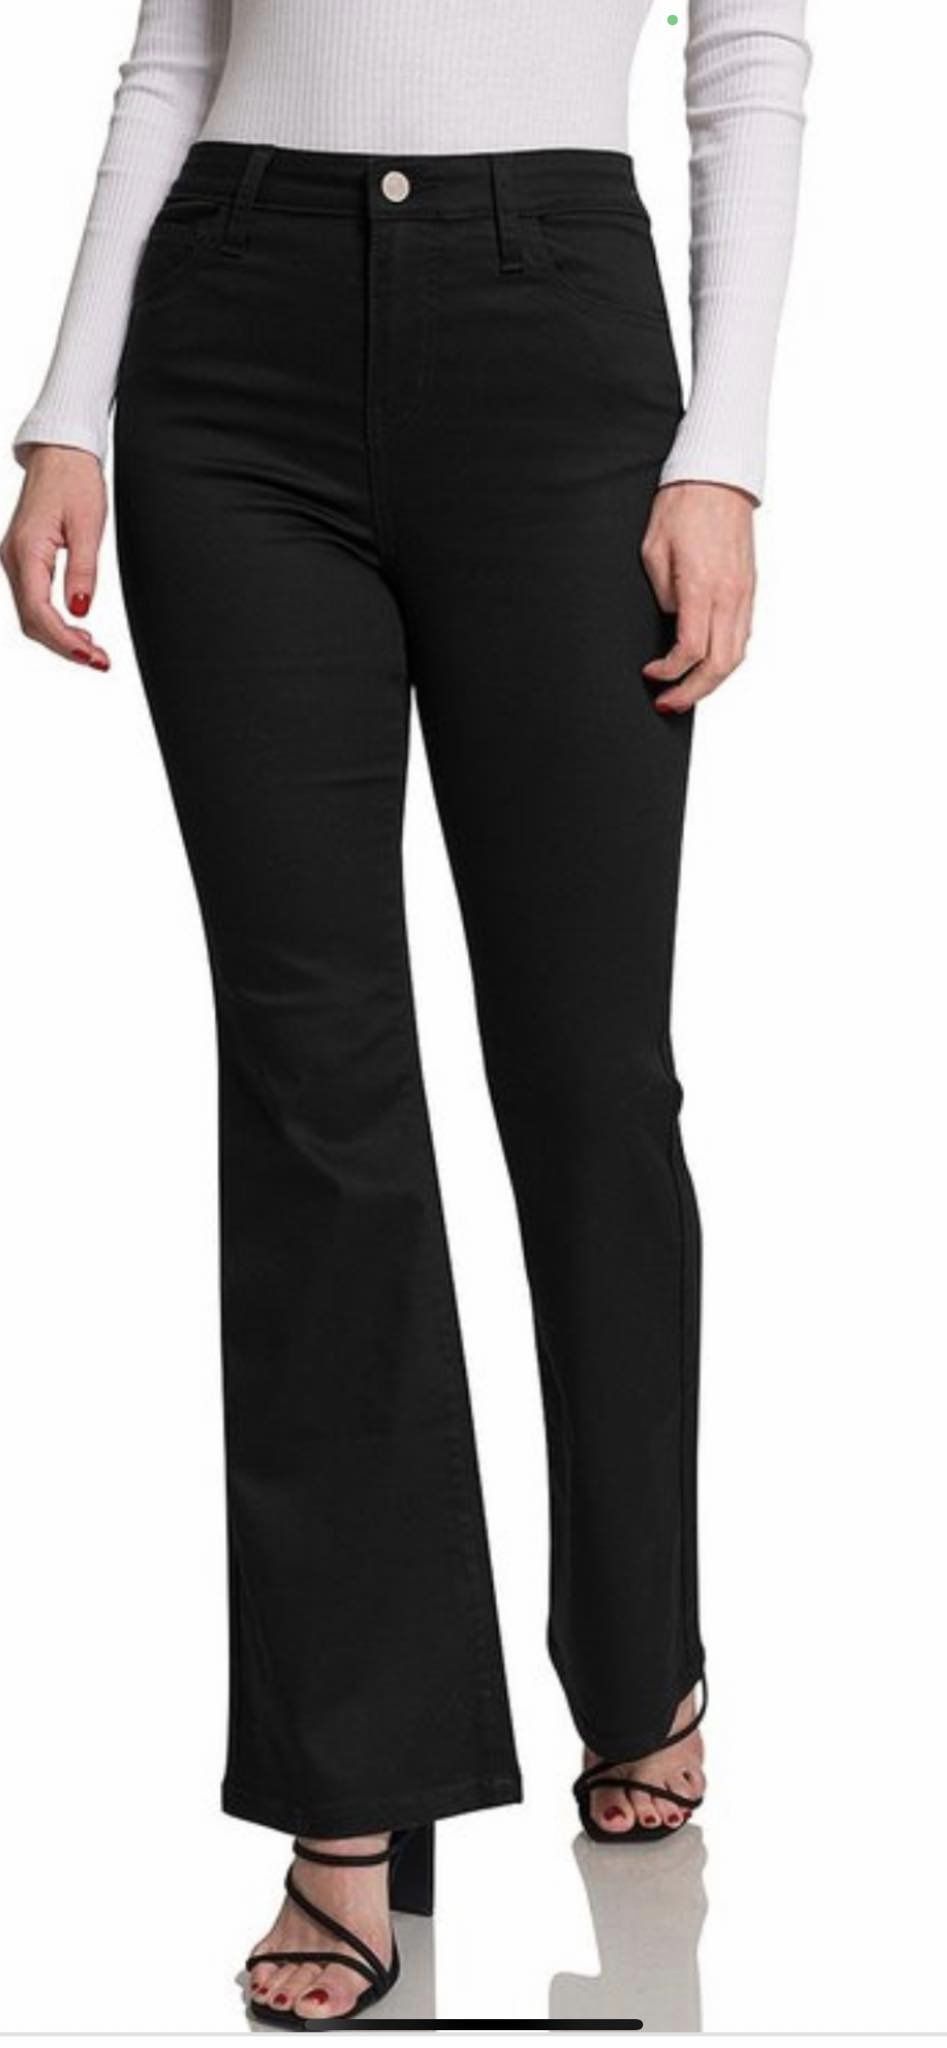 Zenana Stretch Bootcut Jeans several colors to choose from